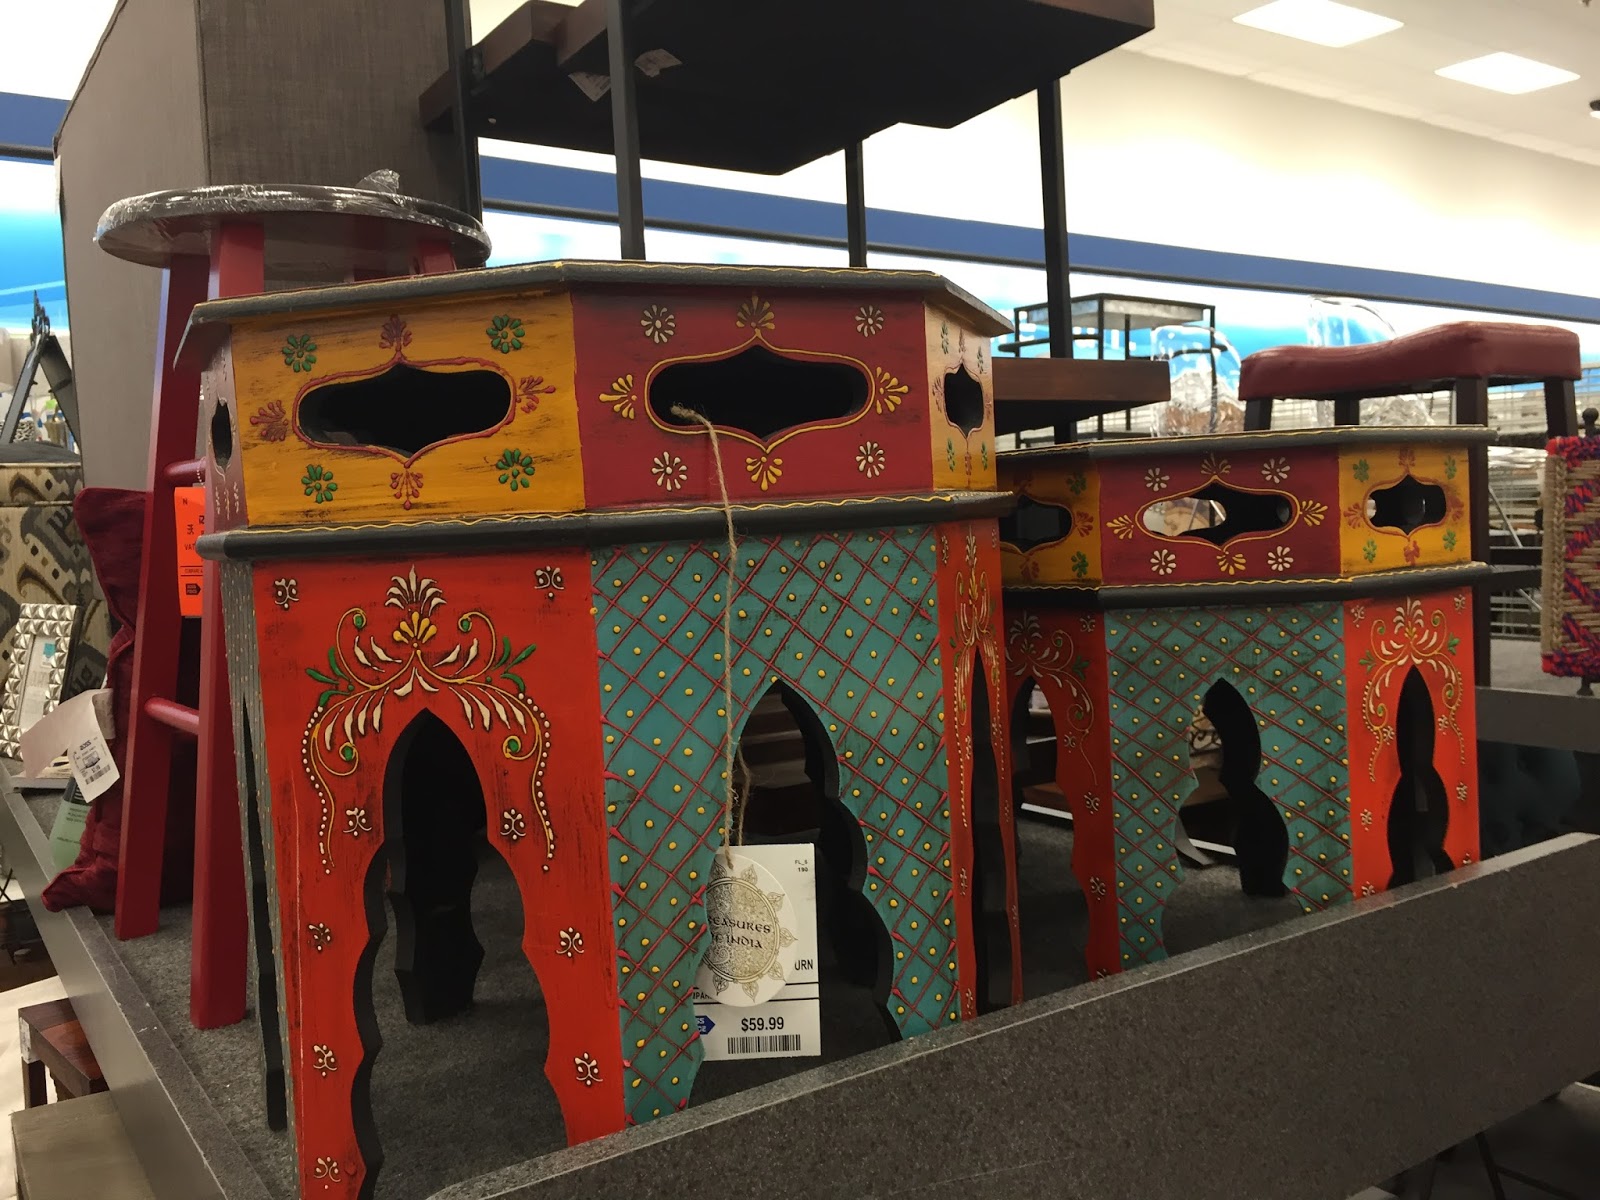 Home Furniture and Decor at Ross Stores